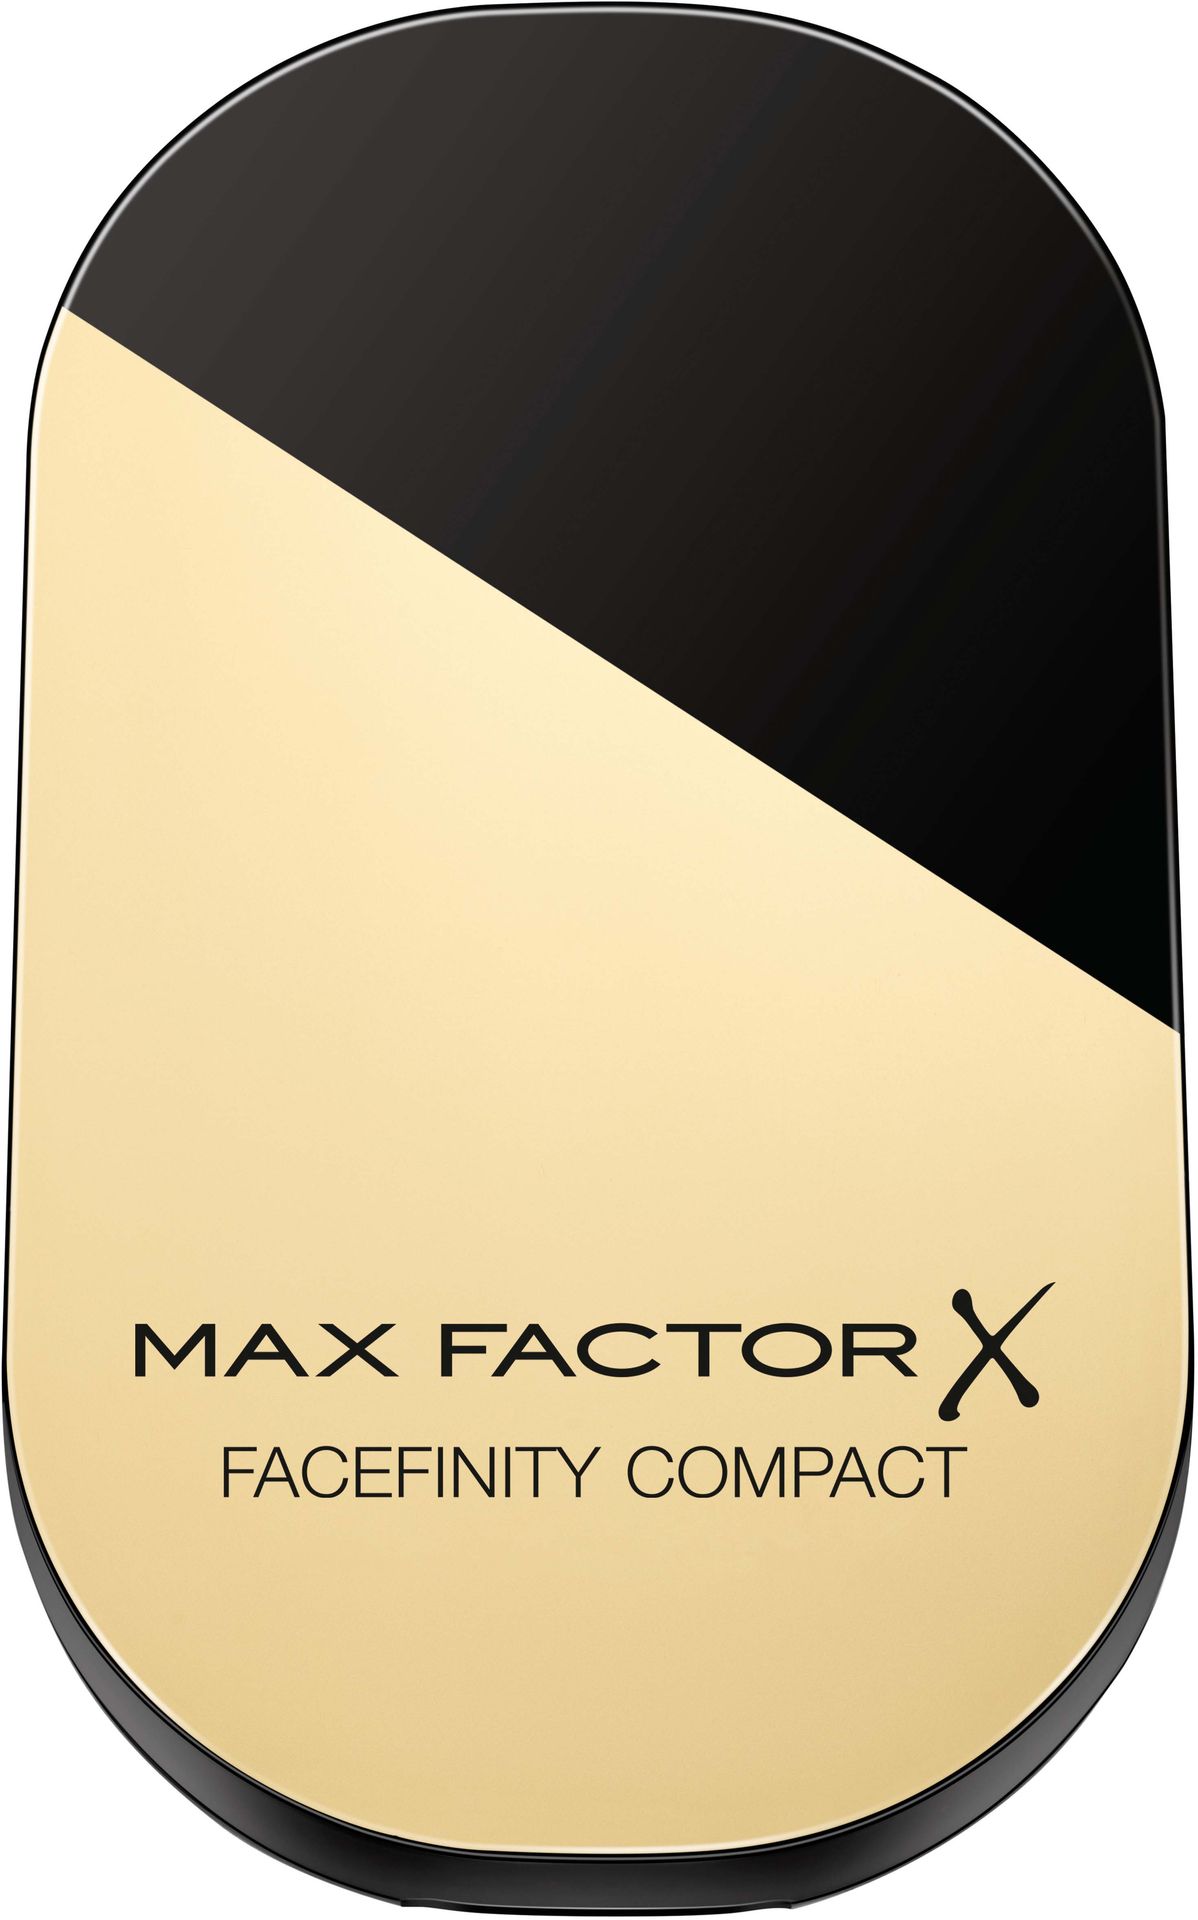 Max Factor Facefinity Compact Foundation, SPF 20, Number 001, Porcelain, 10 g